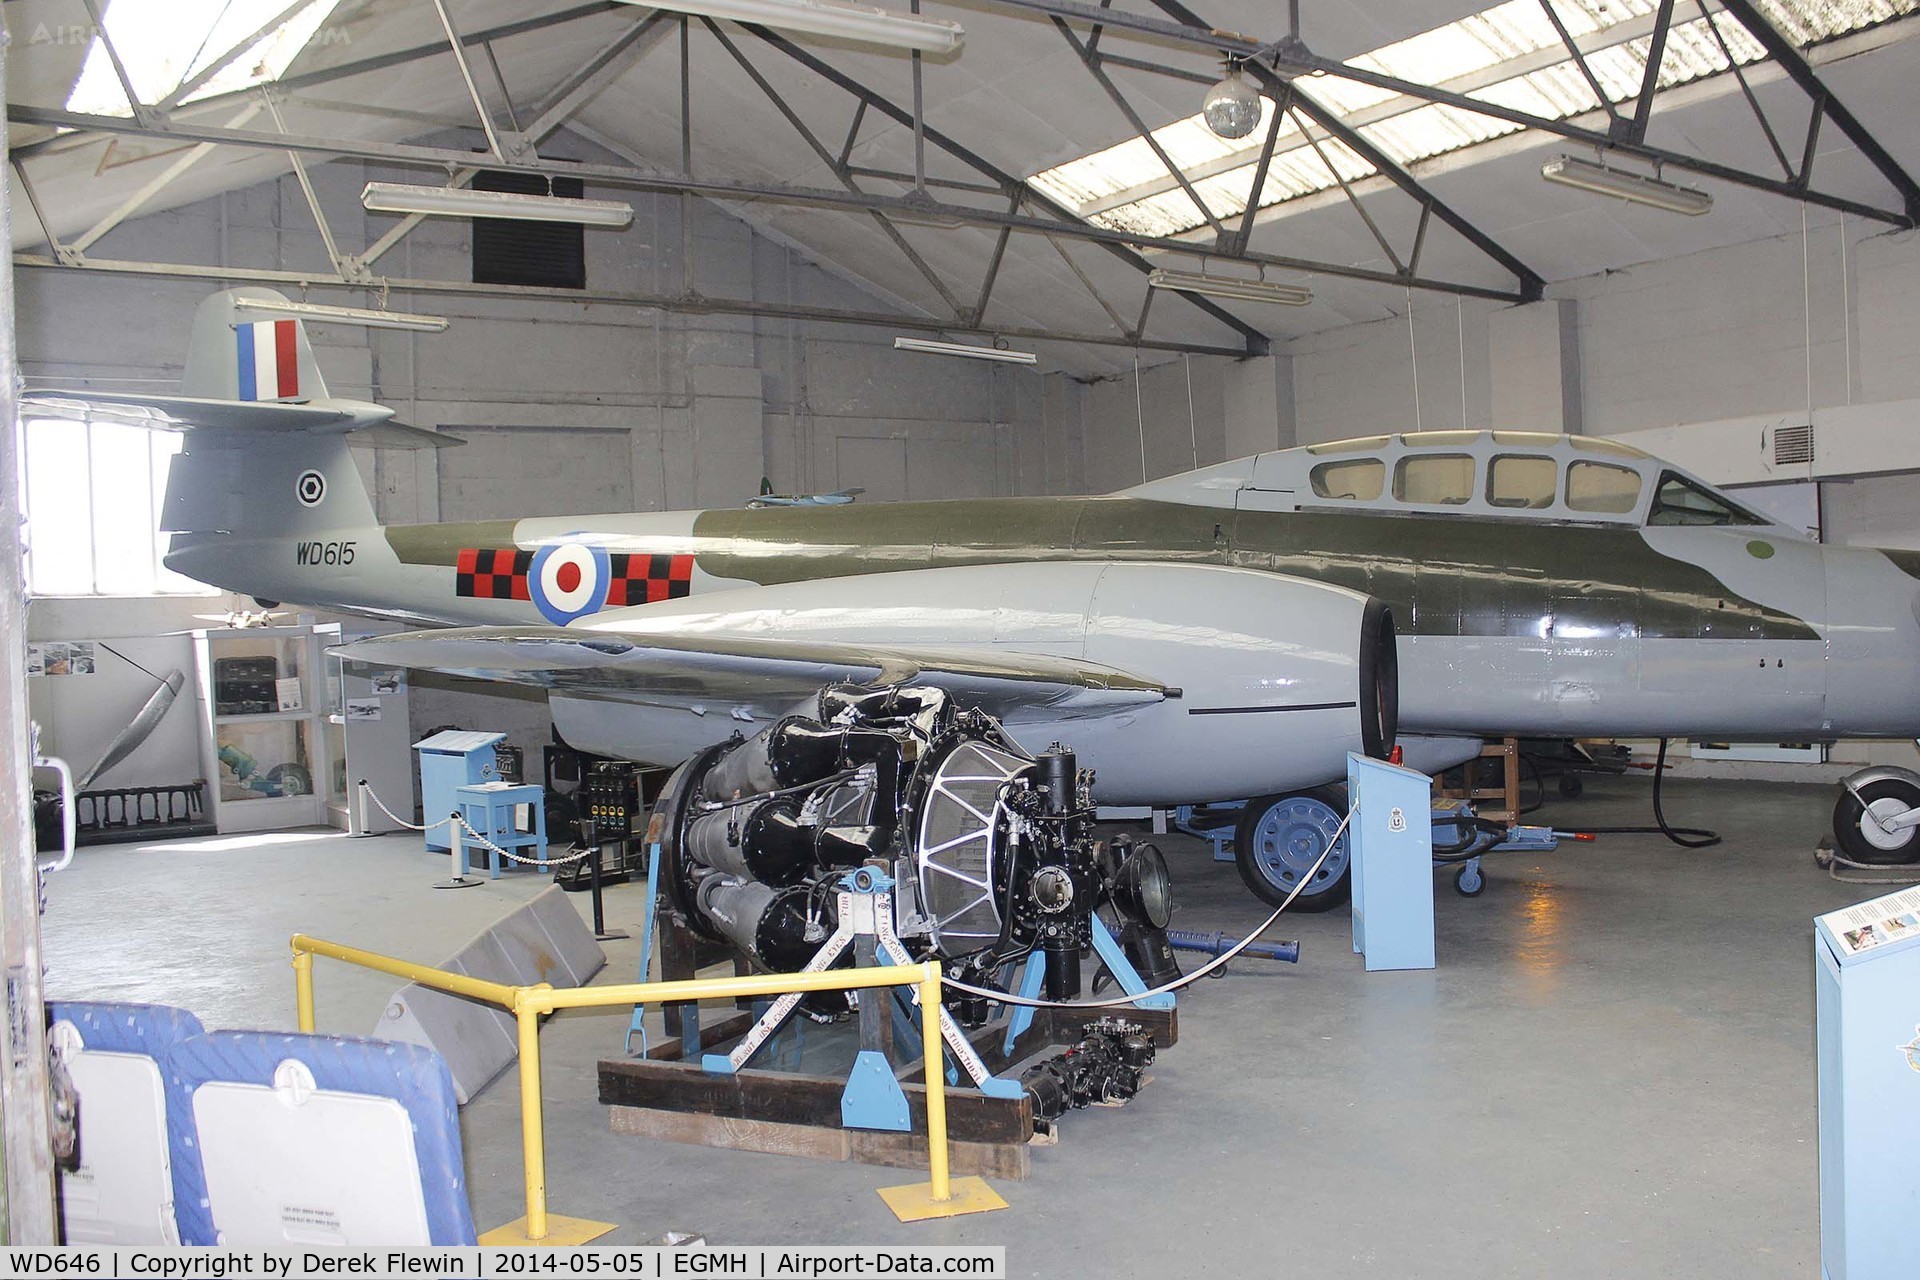 WD646, 1951 Gloster Meteor TT.20 C/N Not found WD646, Seen at the RAF Manston History Museum.